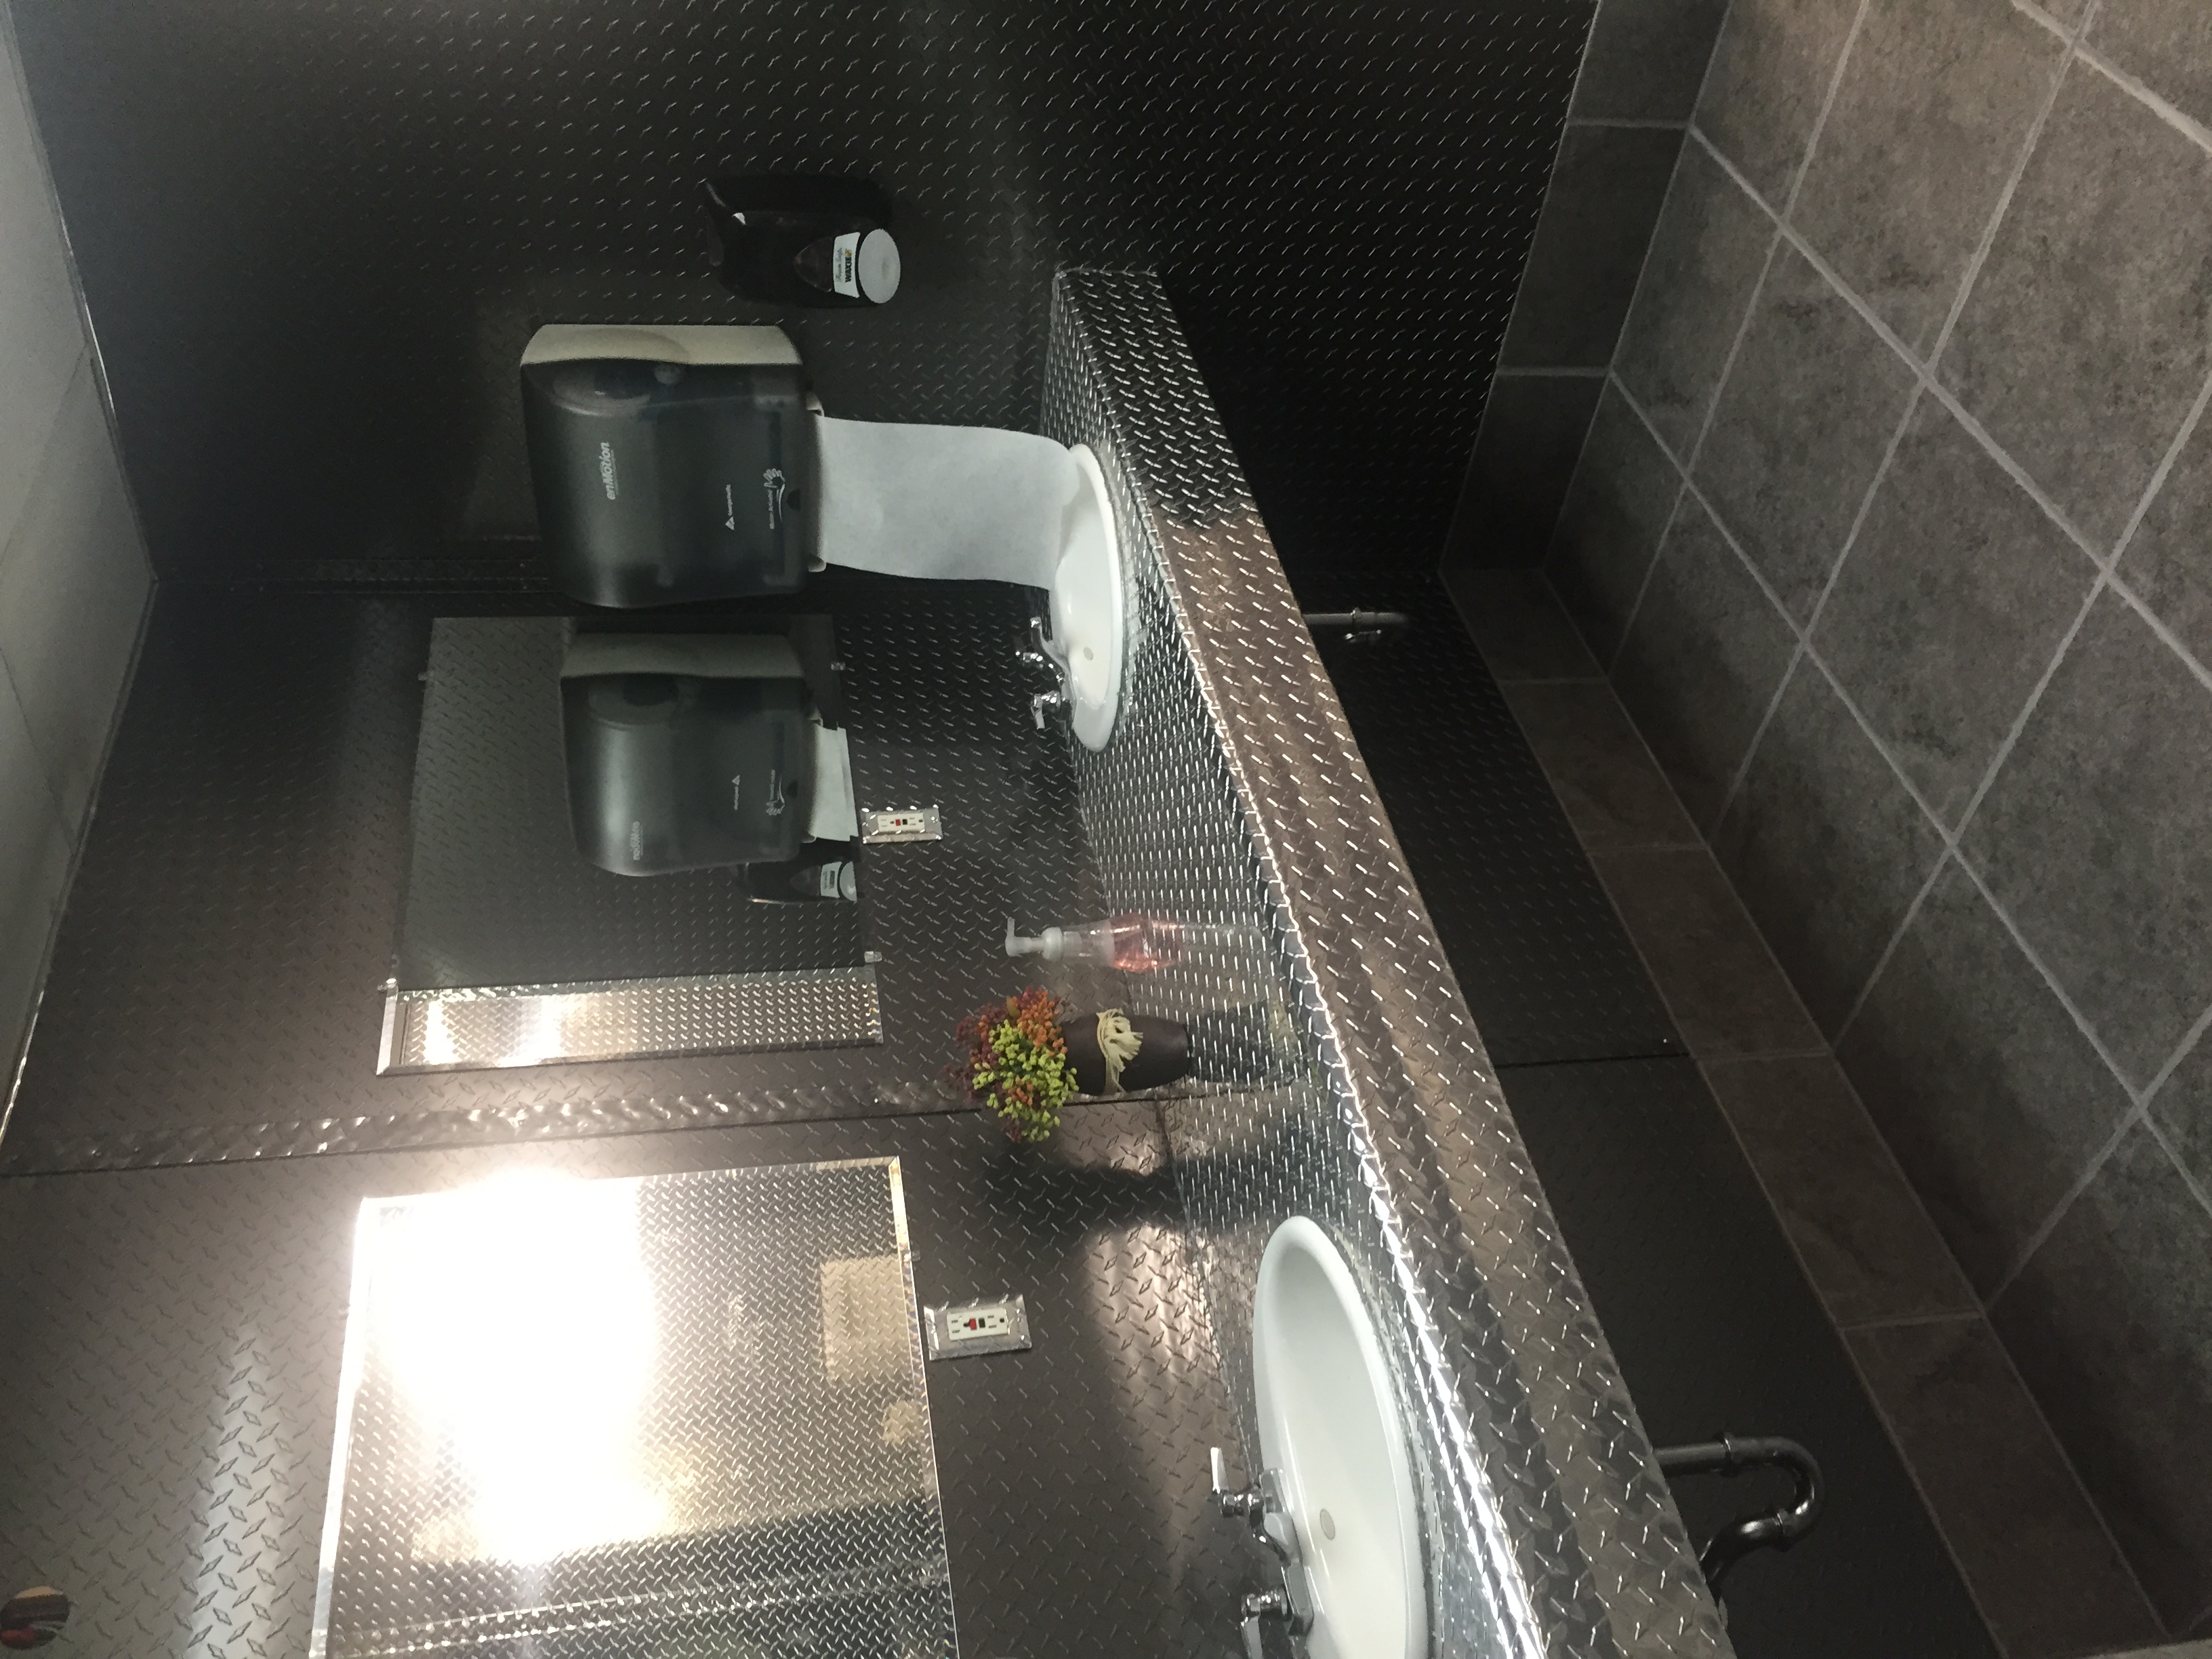 Bathroom using black and silver diamond plate sheets from CutsMetal